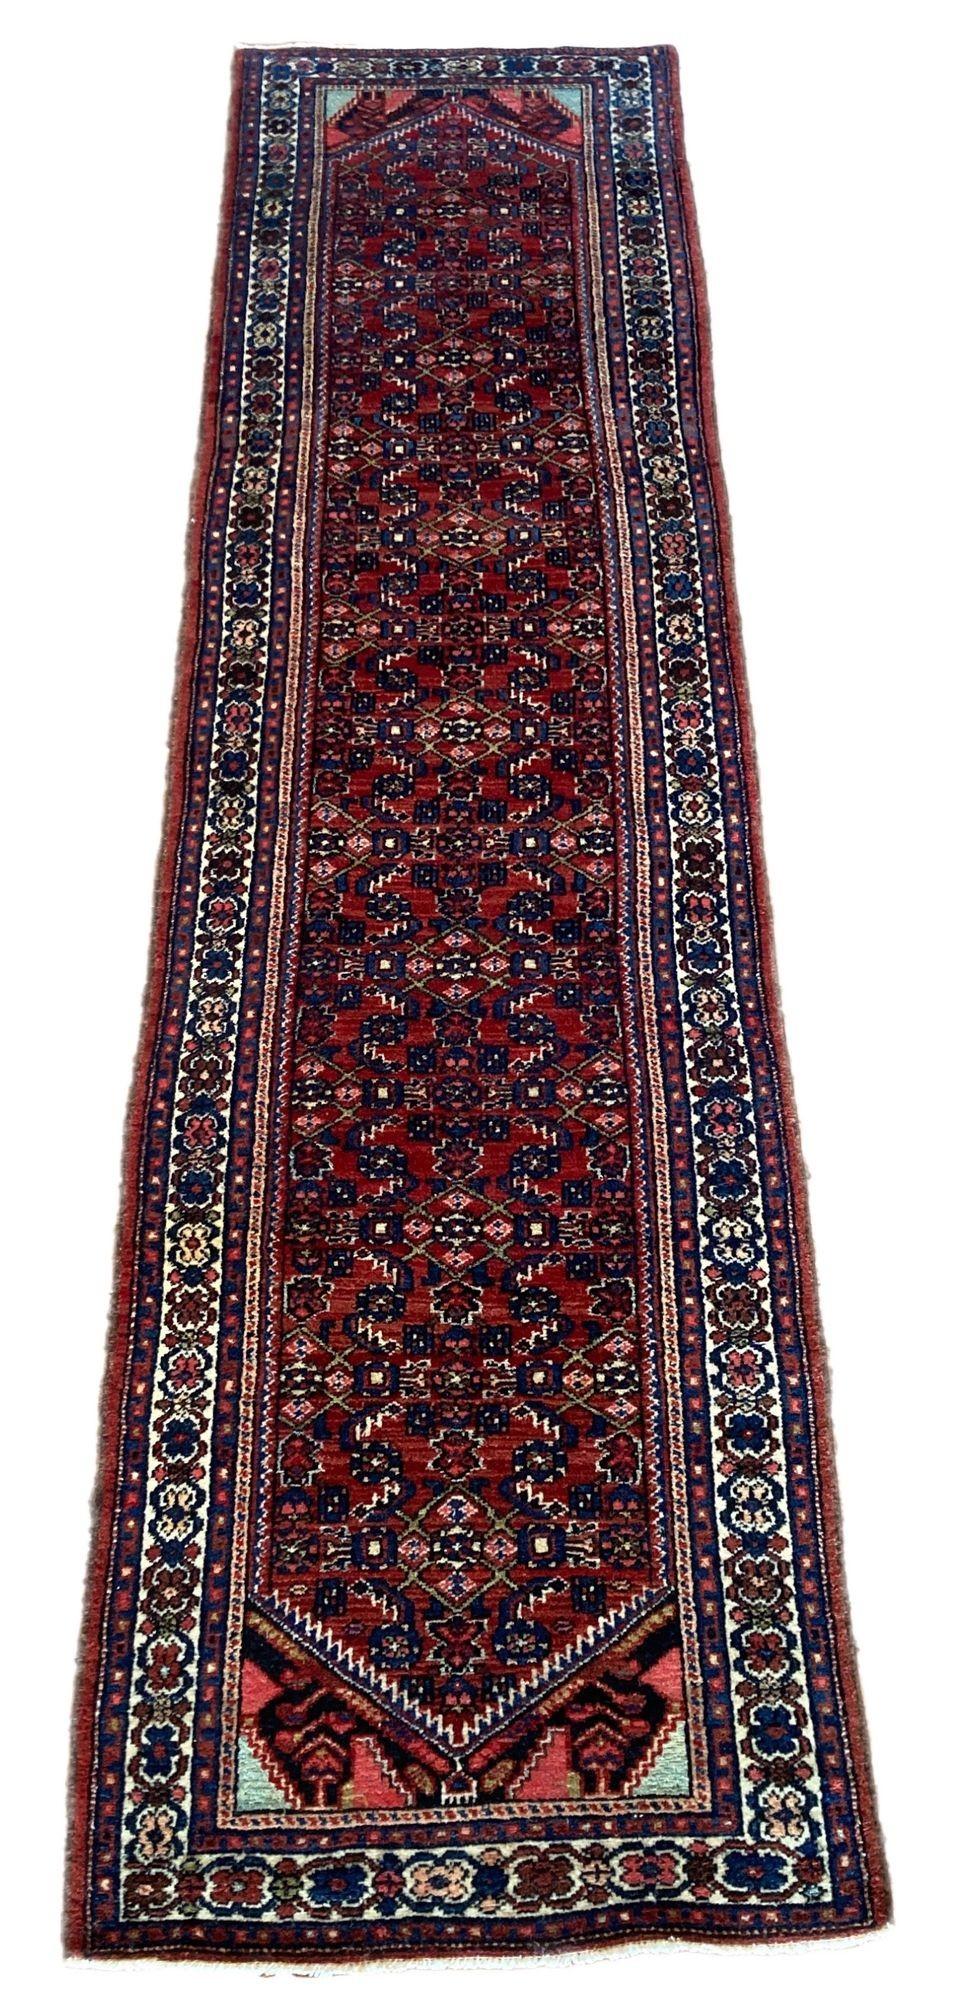 A beautiful vintage Hamadan runner, handwoven circa 1940 with a traditional Herati design on a terracotta field and ivory border. Lovely secondary colours of pinks and blues and a good narrow size.
Size: 2.97m x 0.77m (9ft 9in x 2ft 6in)
This rug